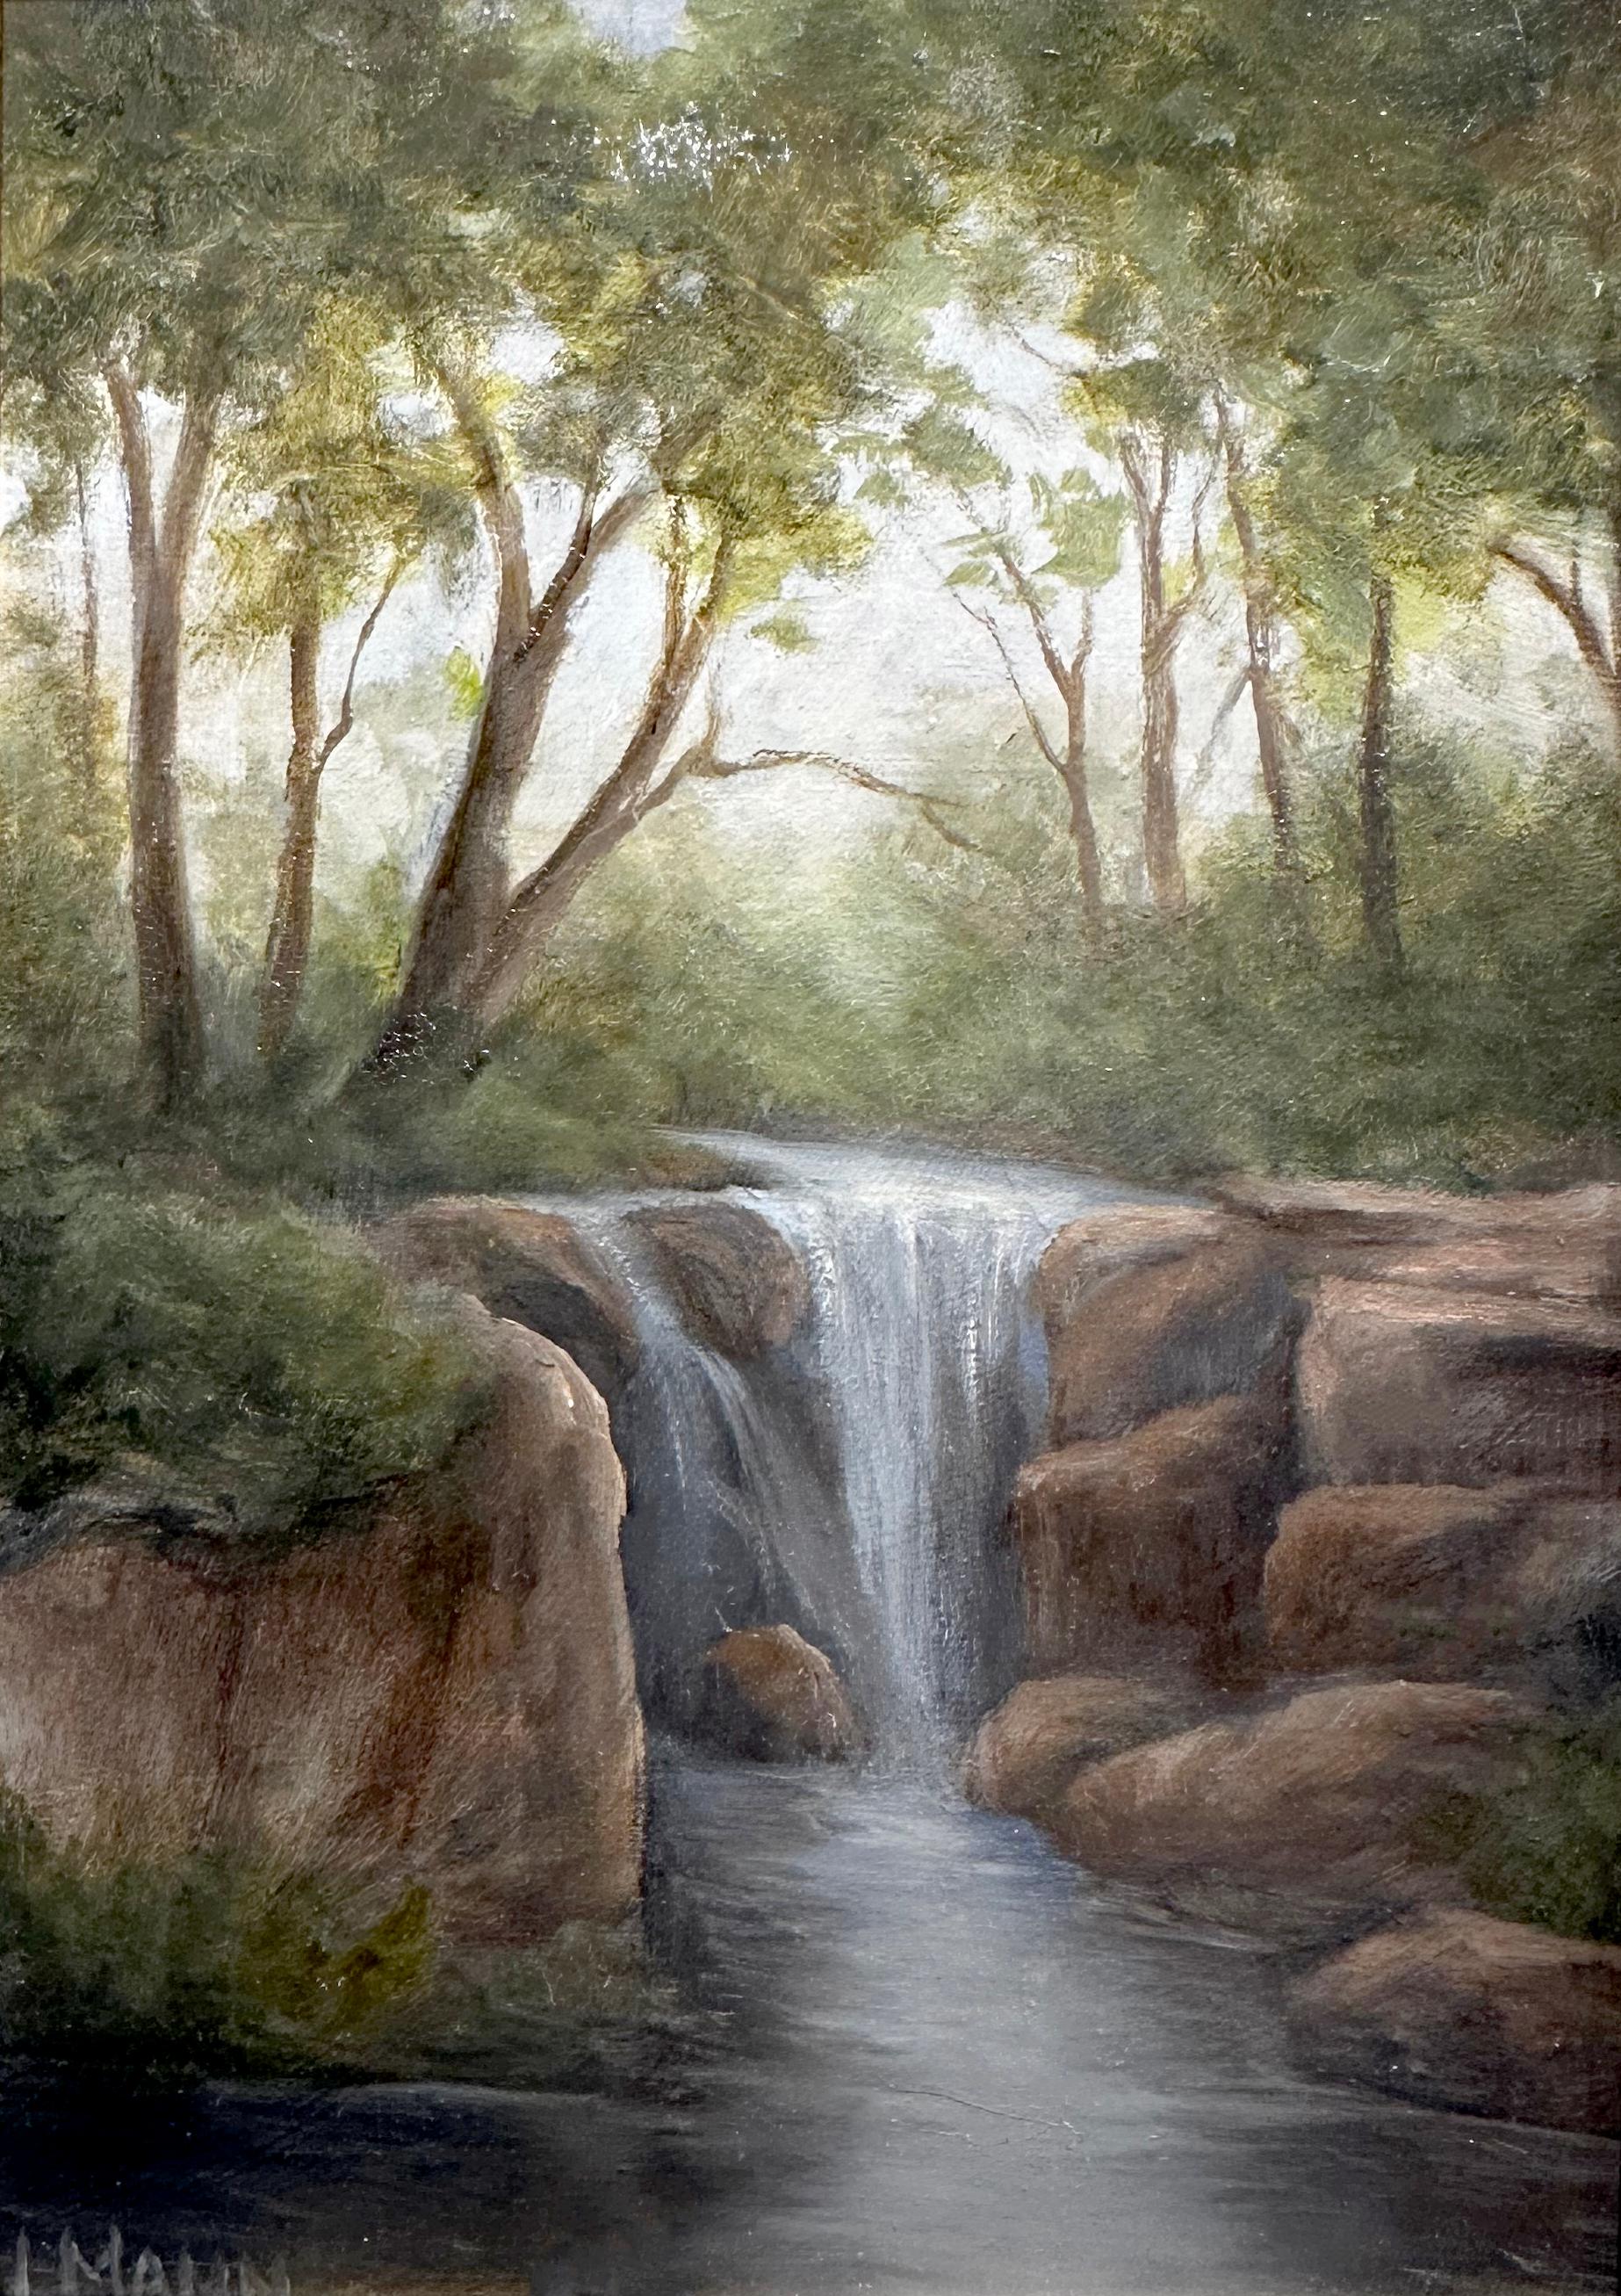 Highlighting the rural beauty and solitude of life in the farm country, Laura Mann's paintings have a timeless and atmospheric quality that call for reminiscence.  Her painting, "Swimming Hole", is a 7x5 oil painting on board featuring a woodland